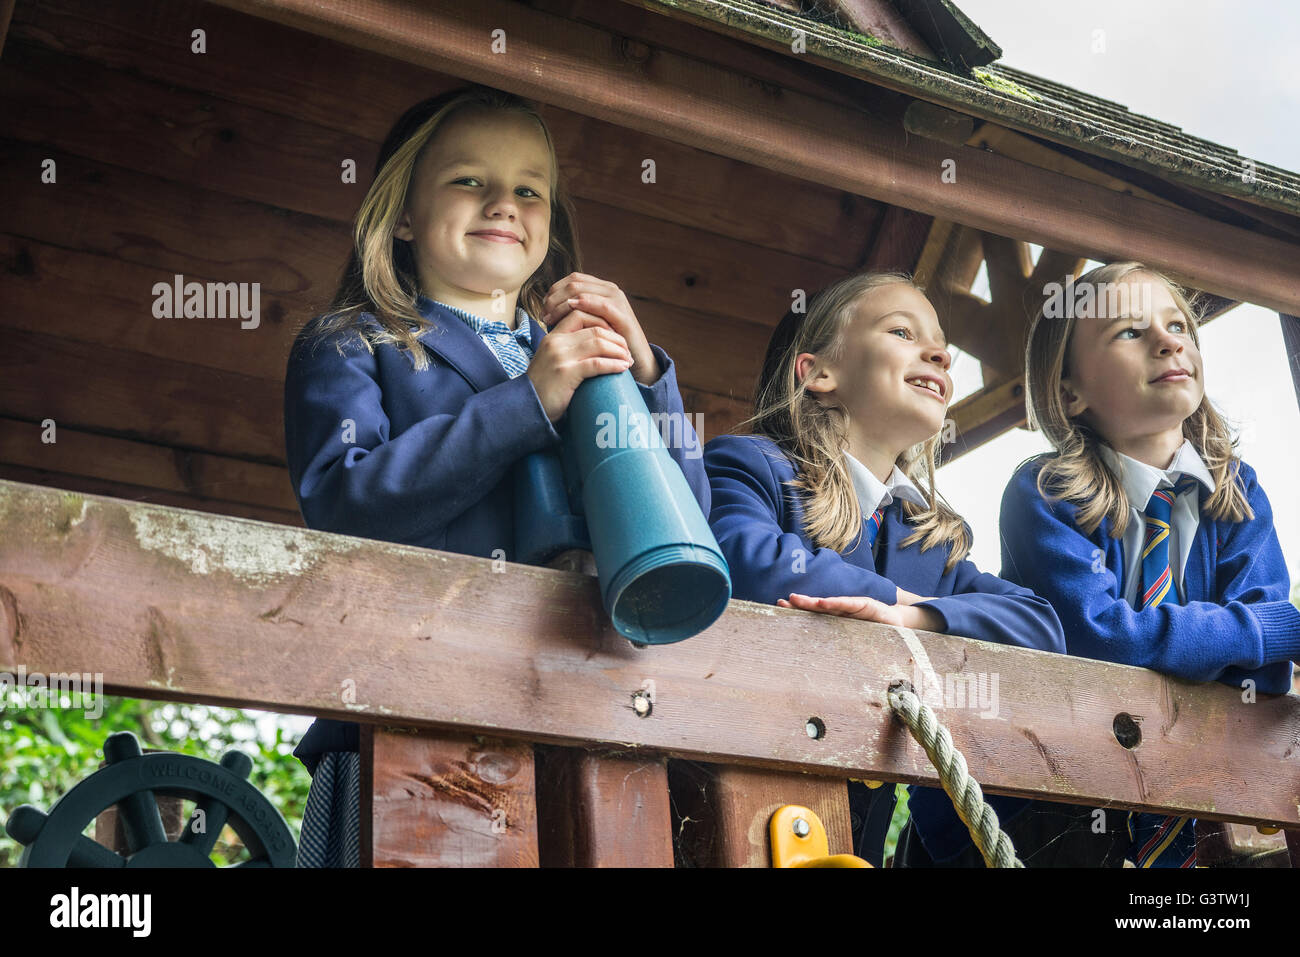 Three girls in school uniform stand together on wooden playground apparatus. Stock Photo